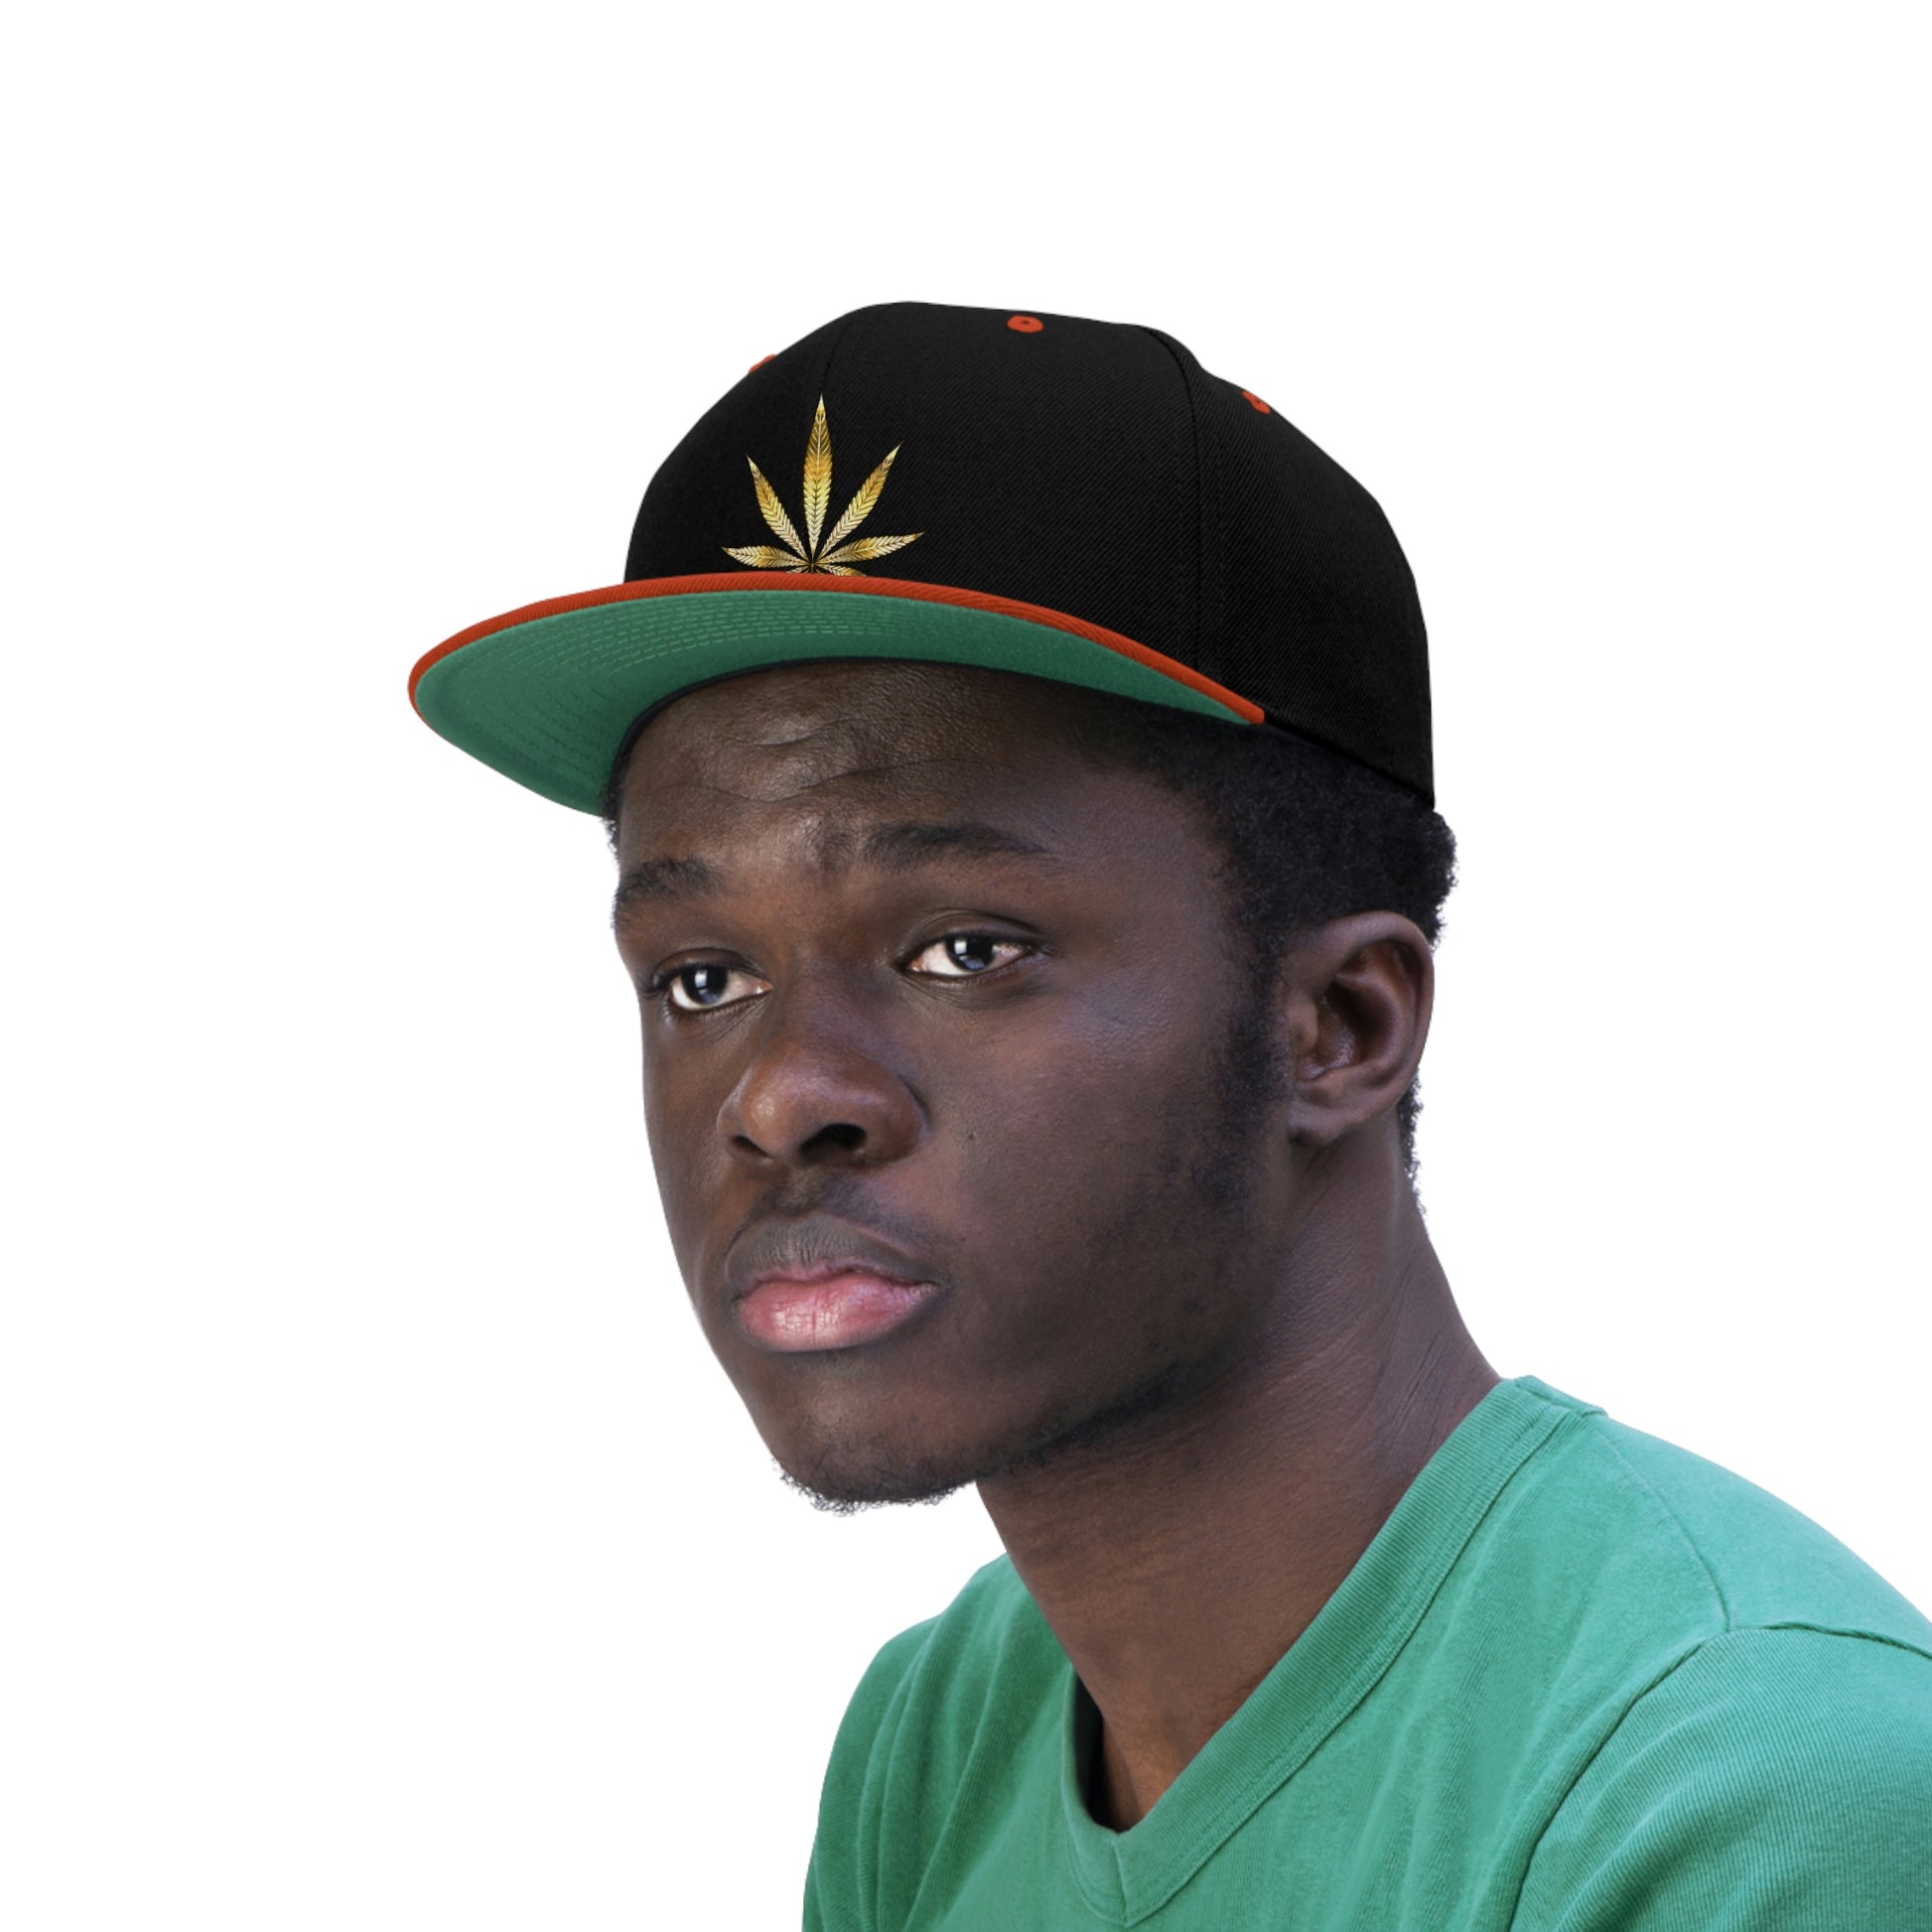 A young man wears the orange and black Gold Marijuana Leaf Snapback Hat with green underbill